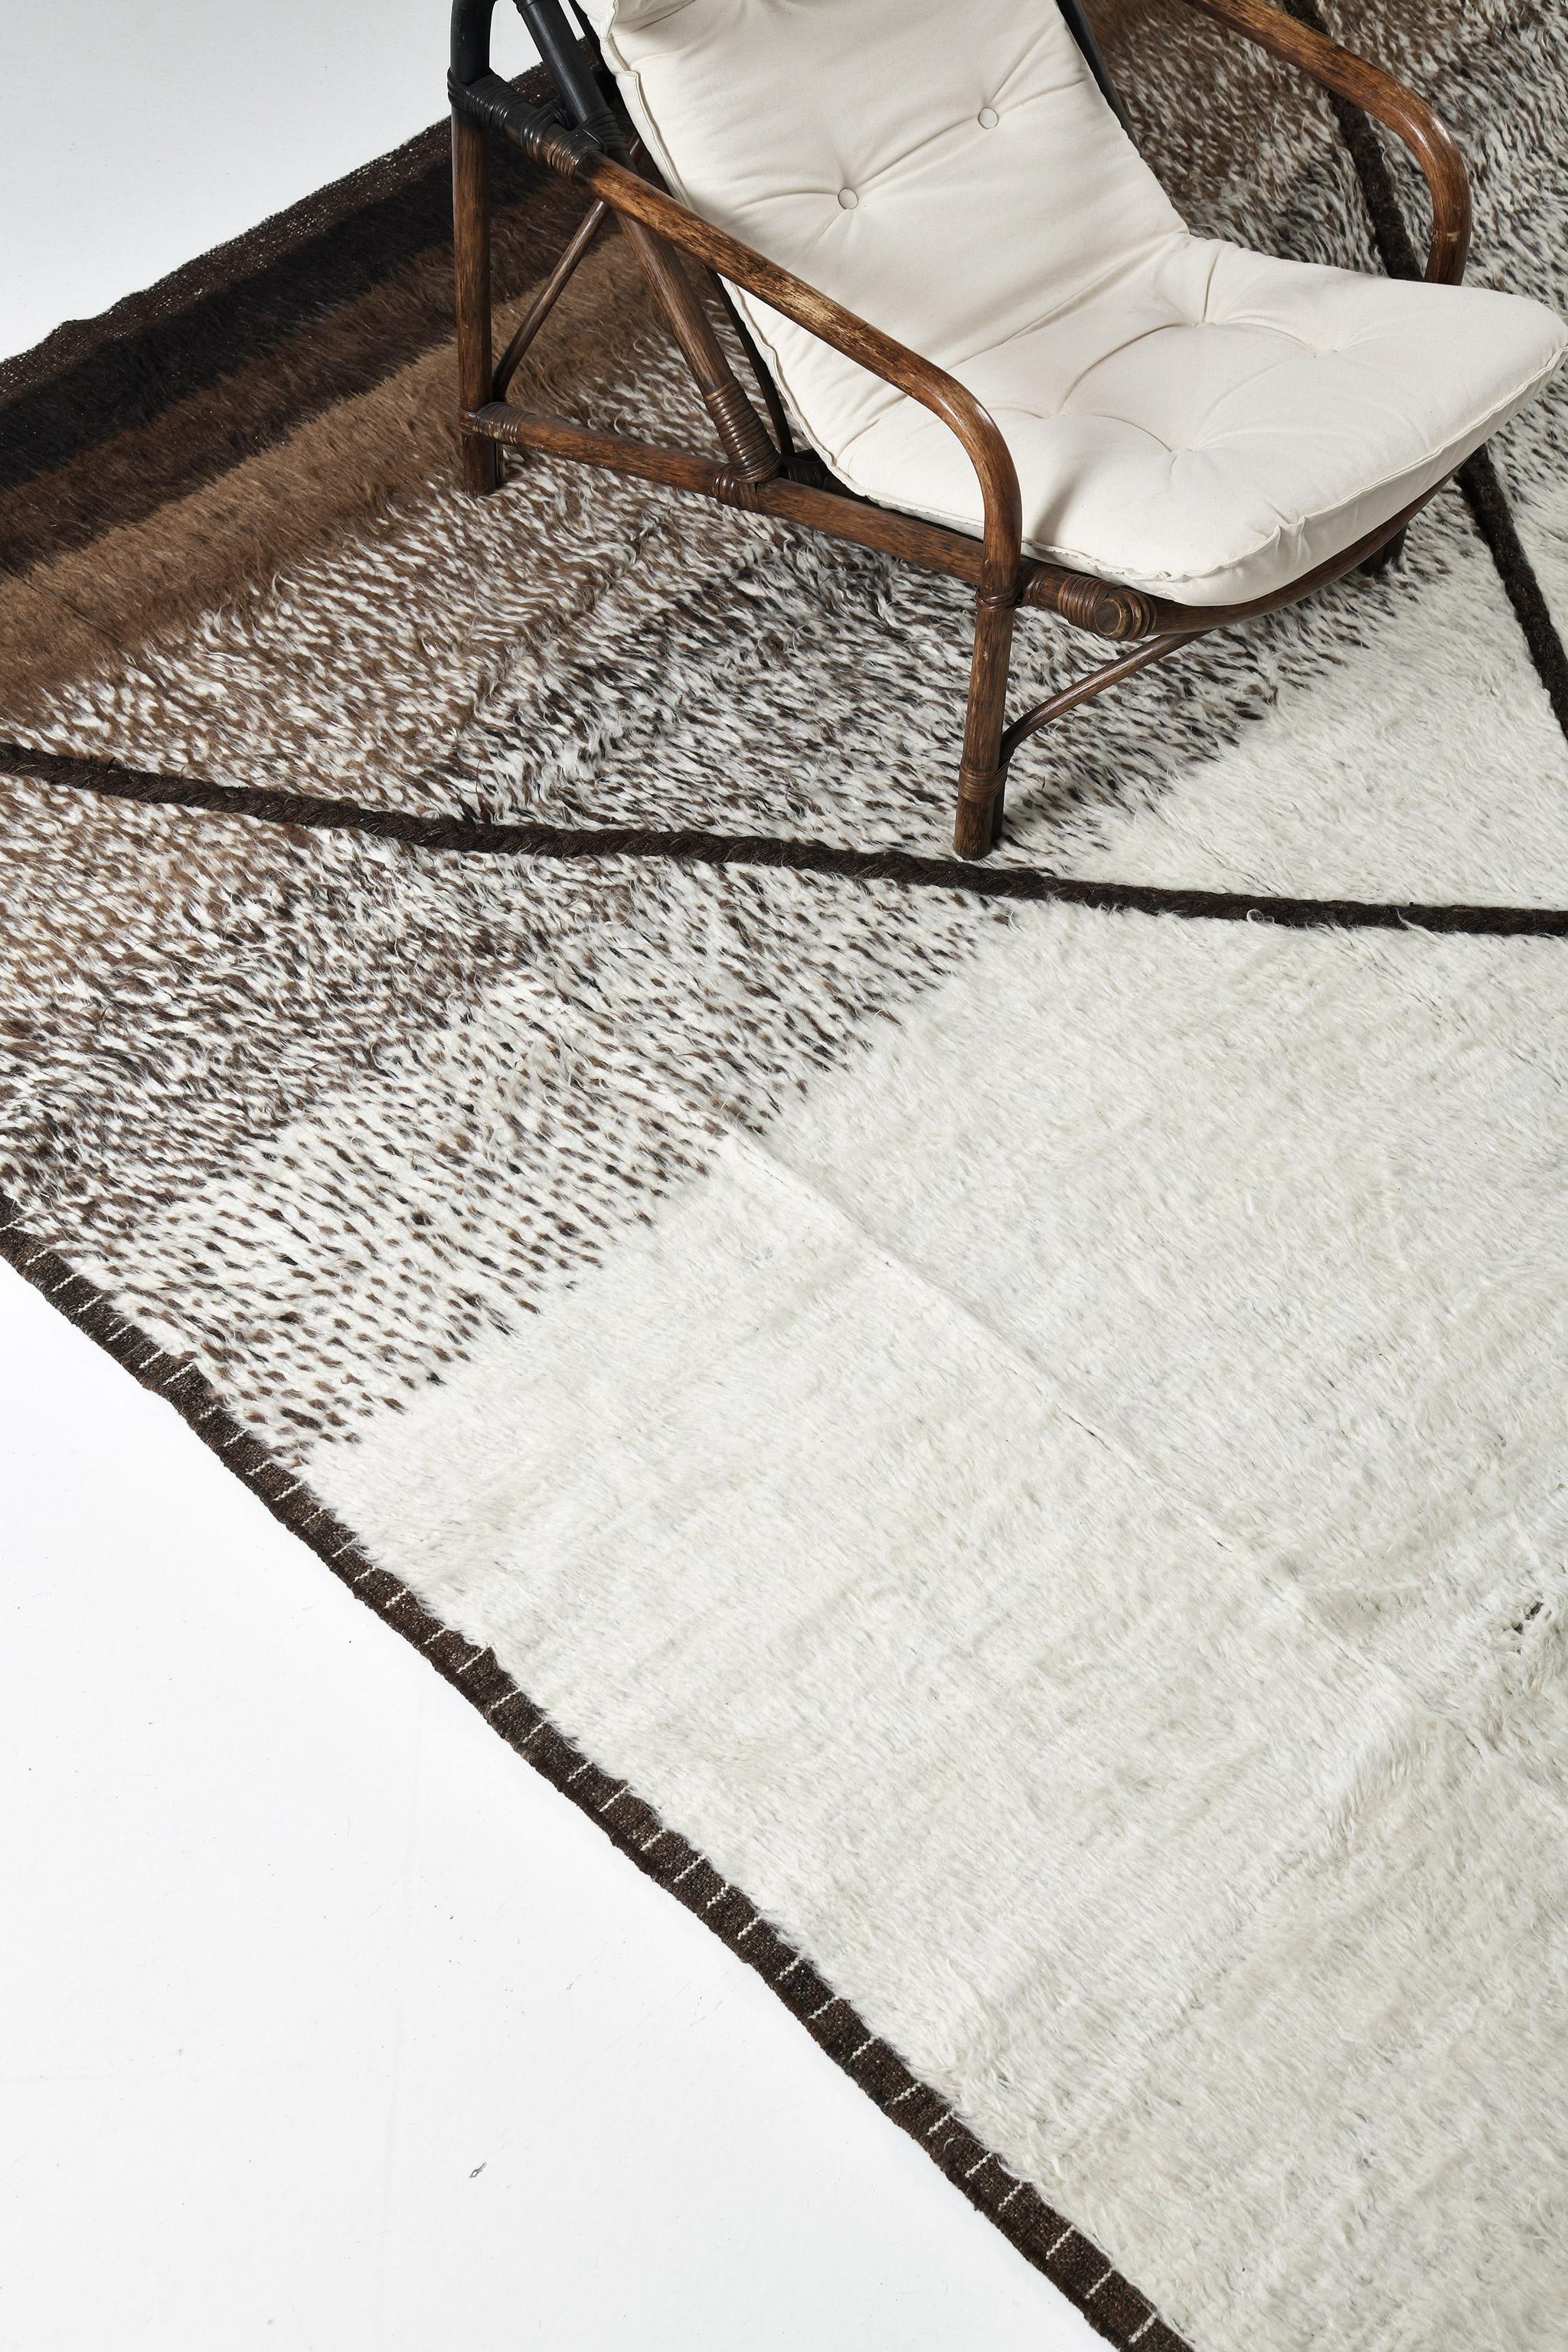 Sebta is a neutral-toned pile weave that features the gradation of sand with a criss-cross accent on this work of art. Perfectly made for the contemporary interior that maximizes the elegance and luxury of your space.

Rug Number
30596
Size
9'